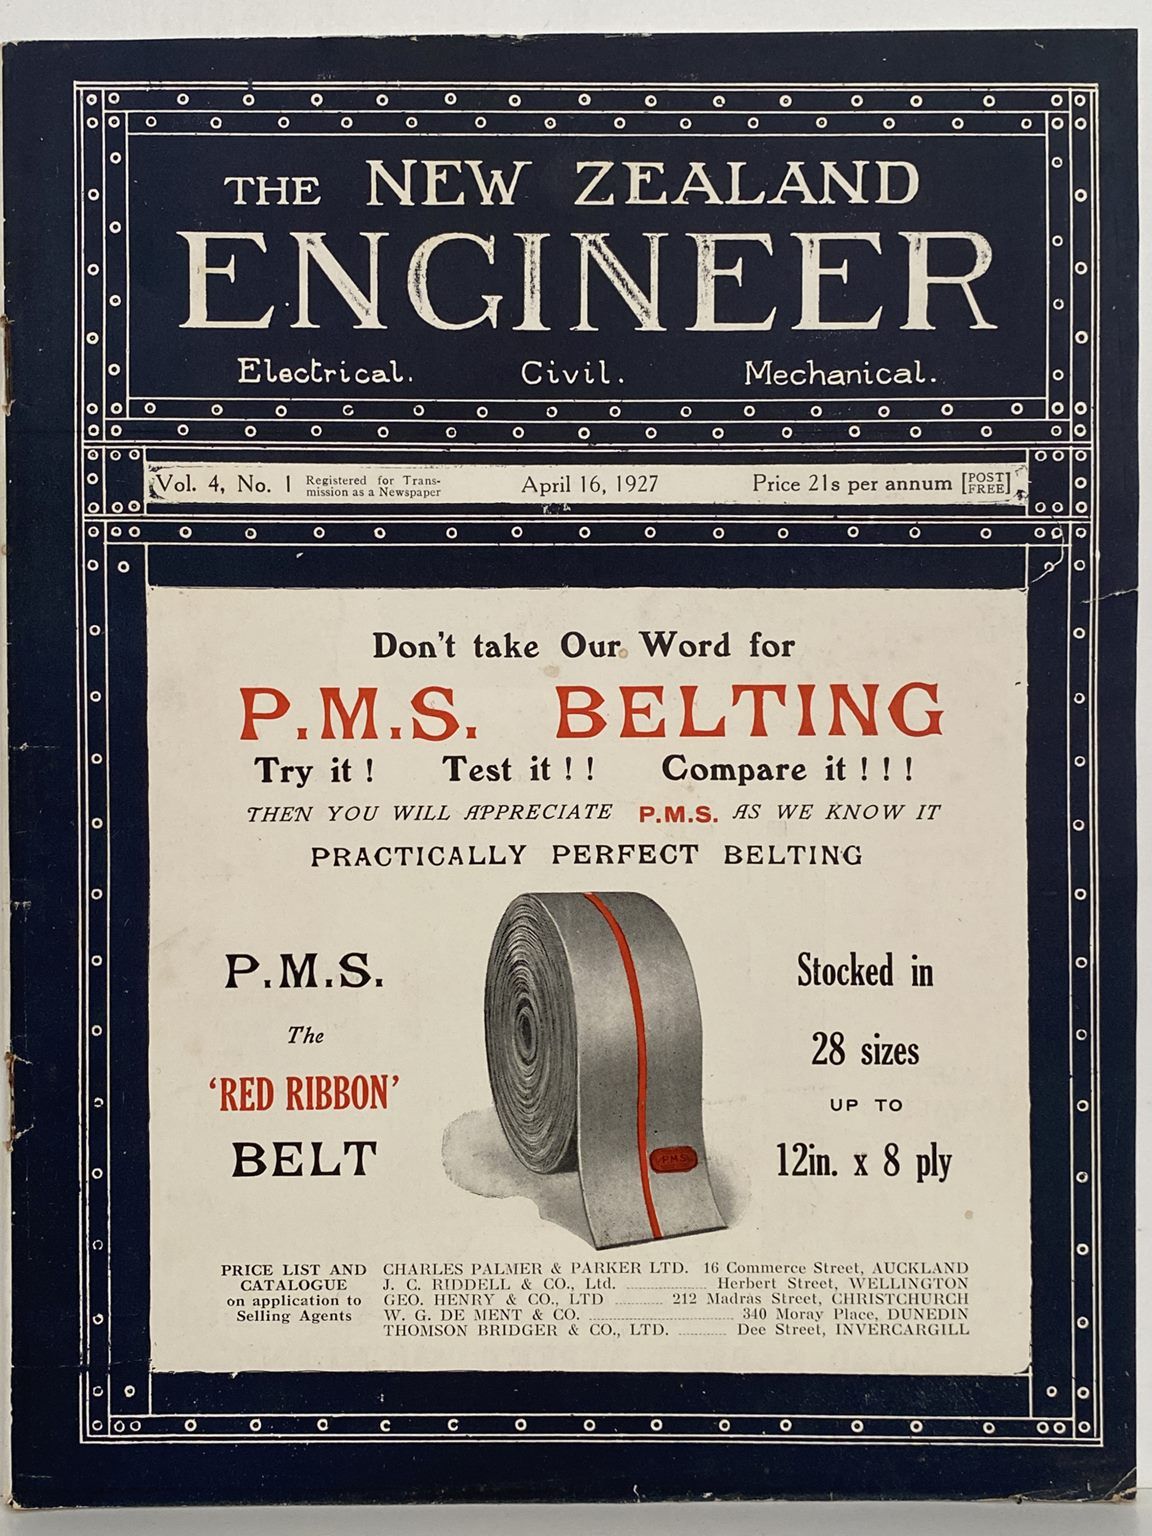 OLD MAGAZINE: The New Zealand Engineer Vol. 4, No. 1 - 16 April 1927